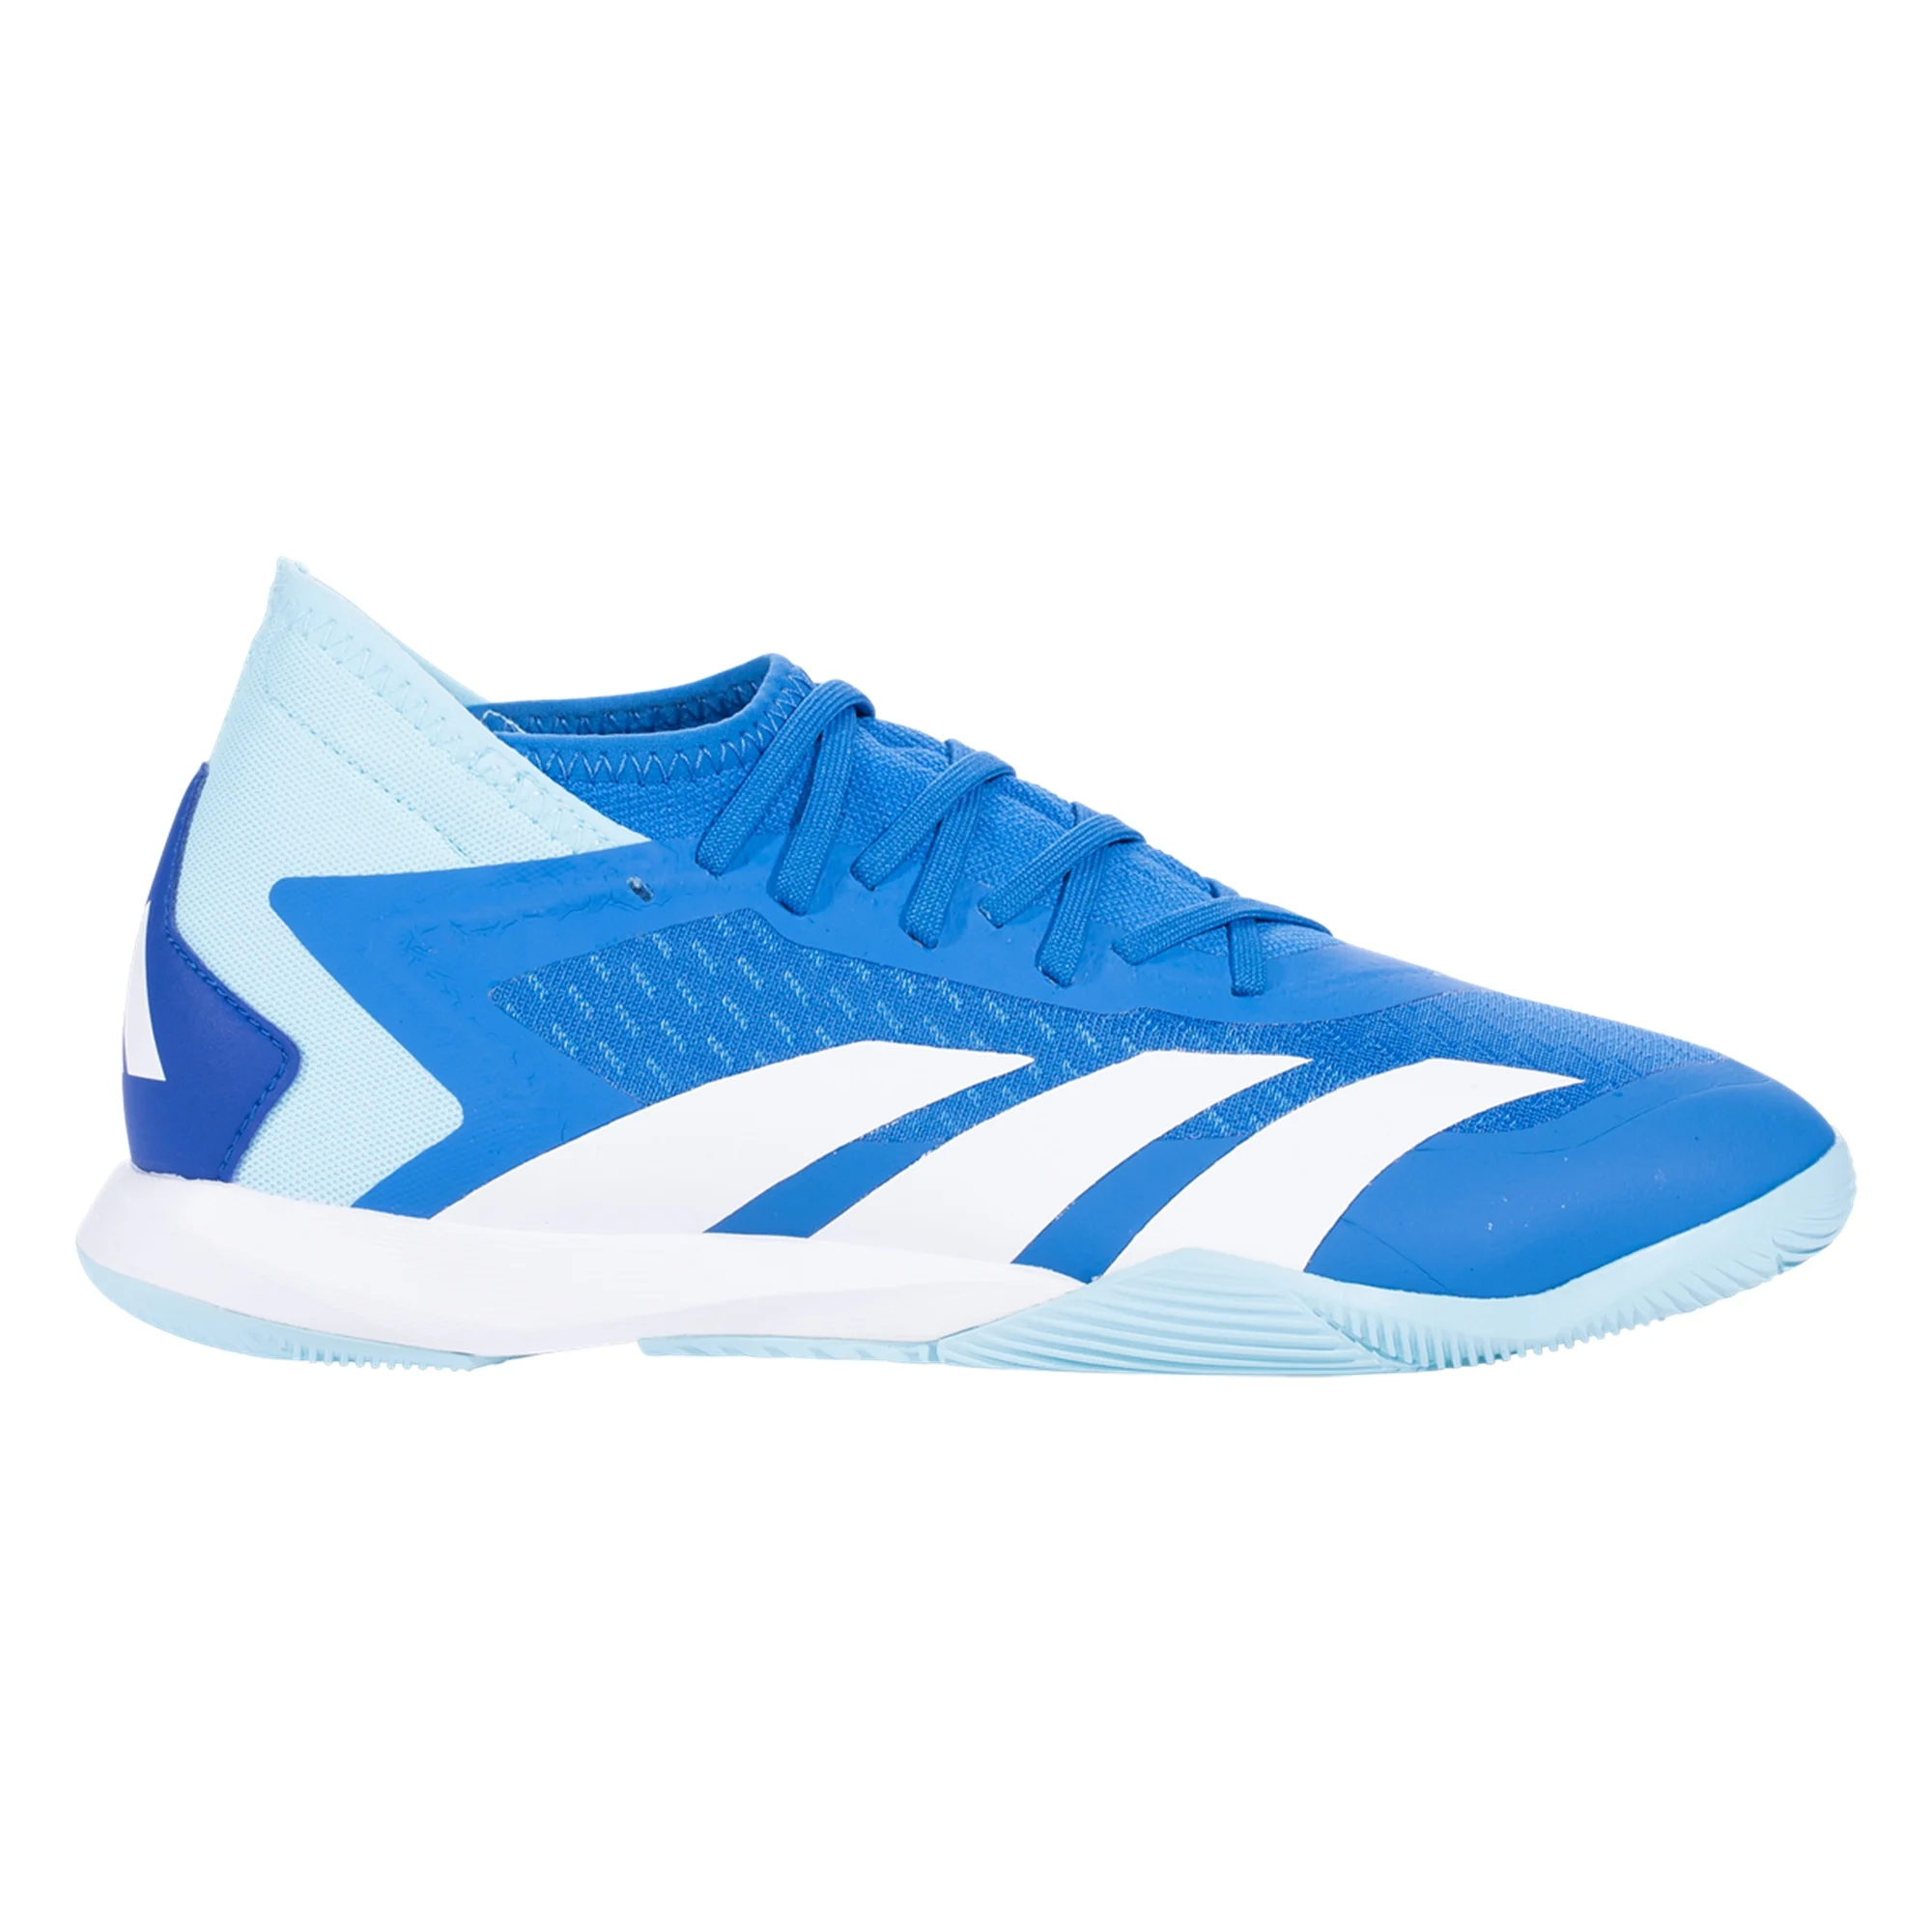 adidas Predator Accuracy.3 Indoor Soccer Shoes (Bright Royal/Bliss Blu -  Soccer Wearhouse